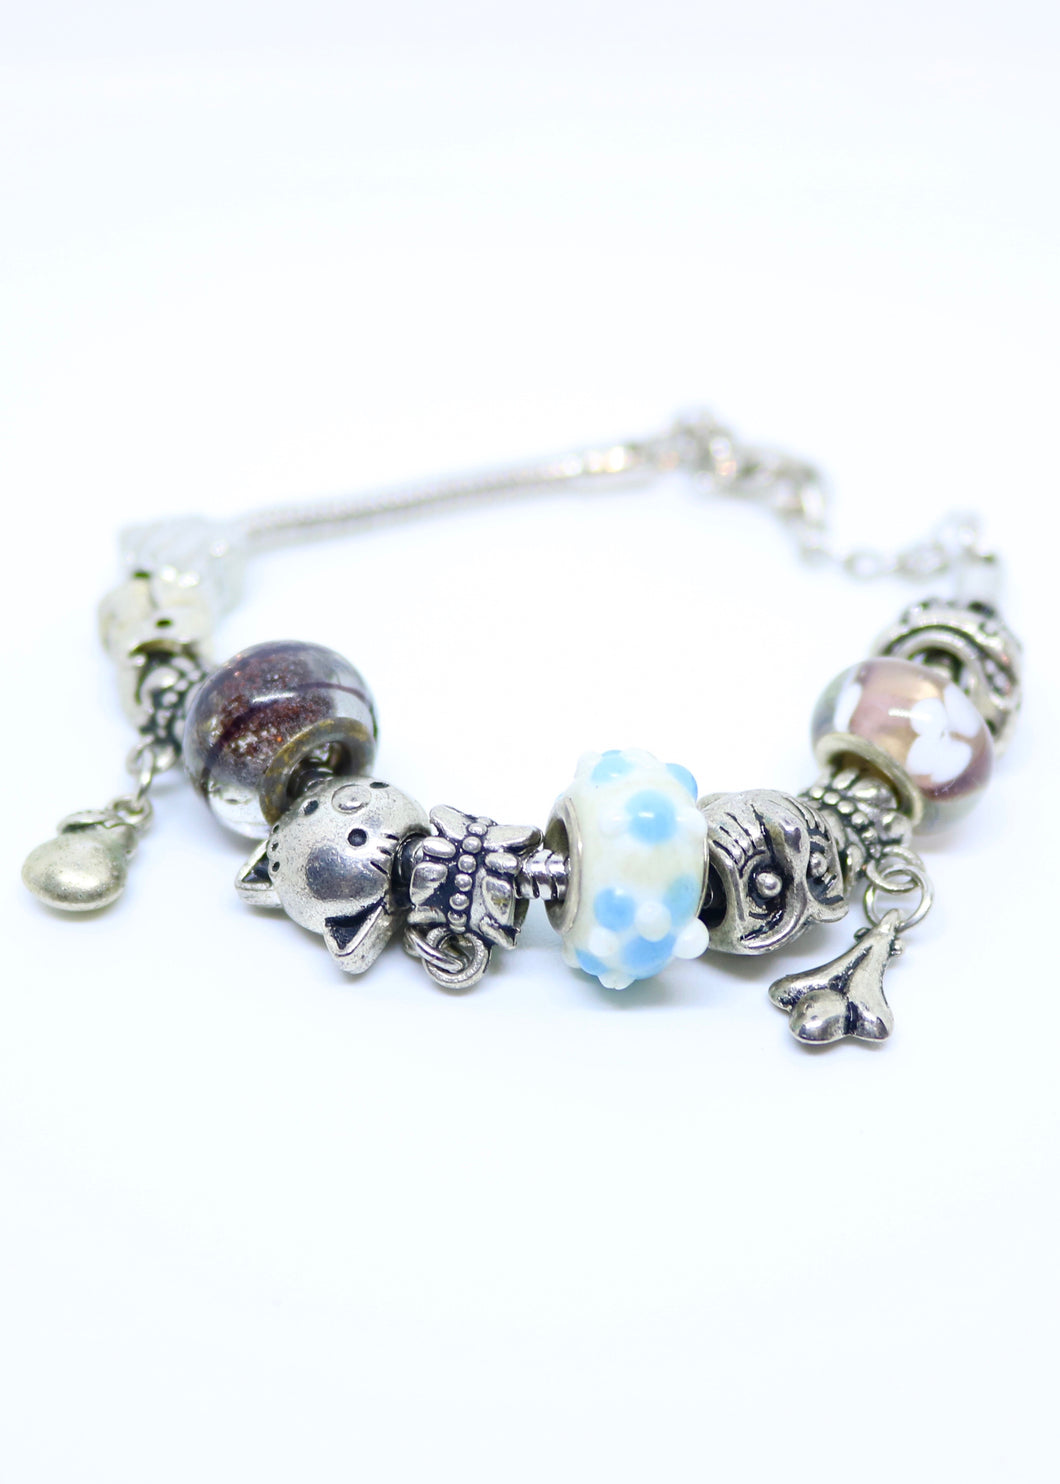 Children's Pandora Style Charm Bracelet - By Feathers Of Italy - Feathers Of Italy 